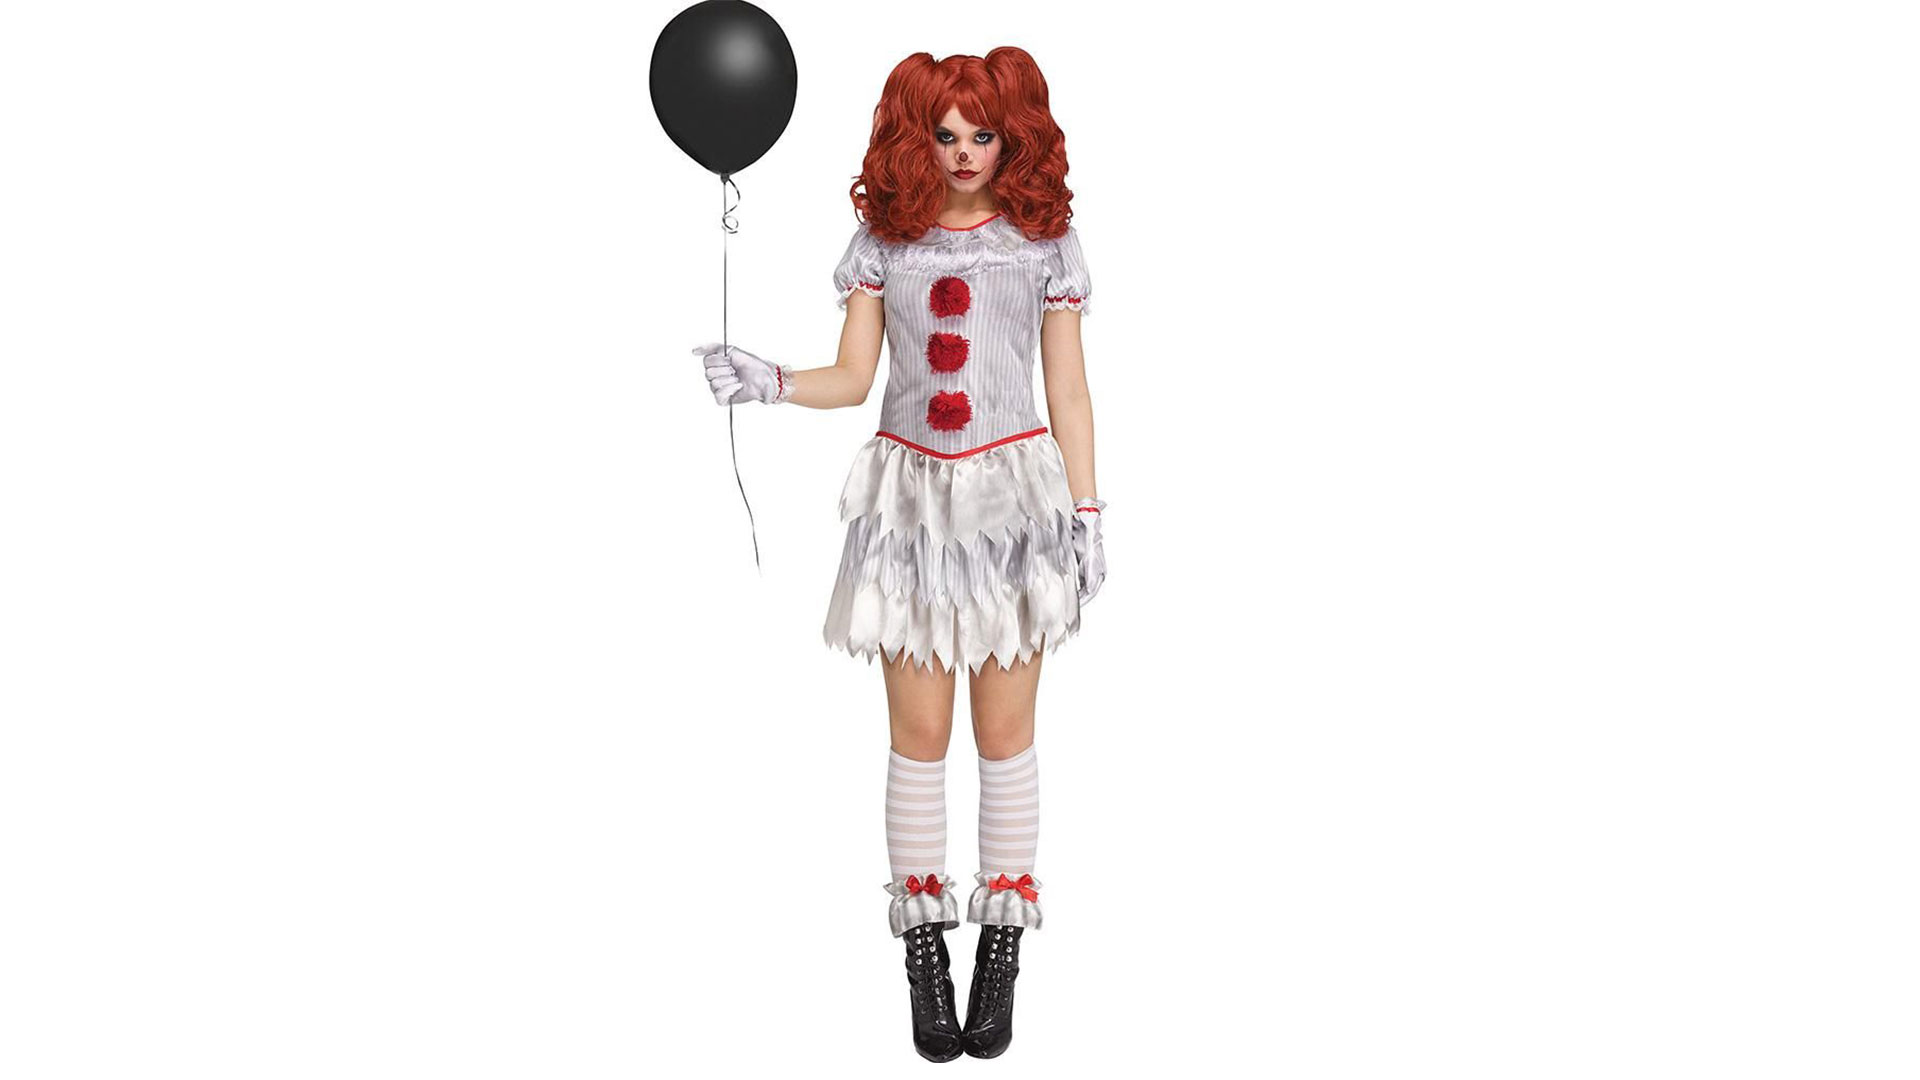 Woman dressed in a scary clown costume she bought on Trade Me.